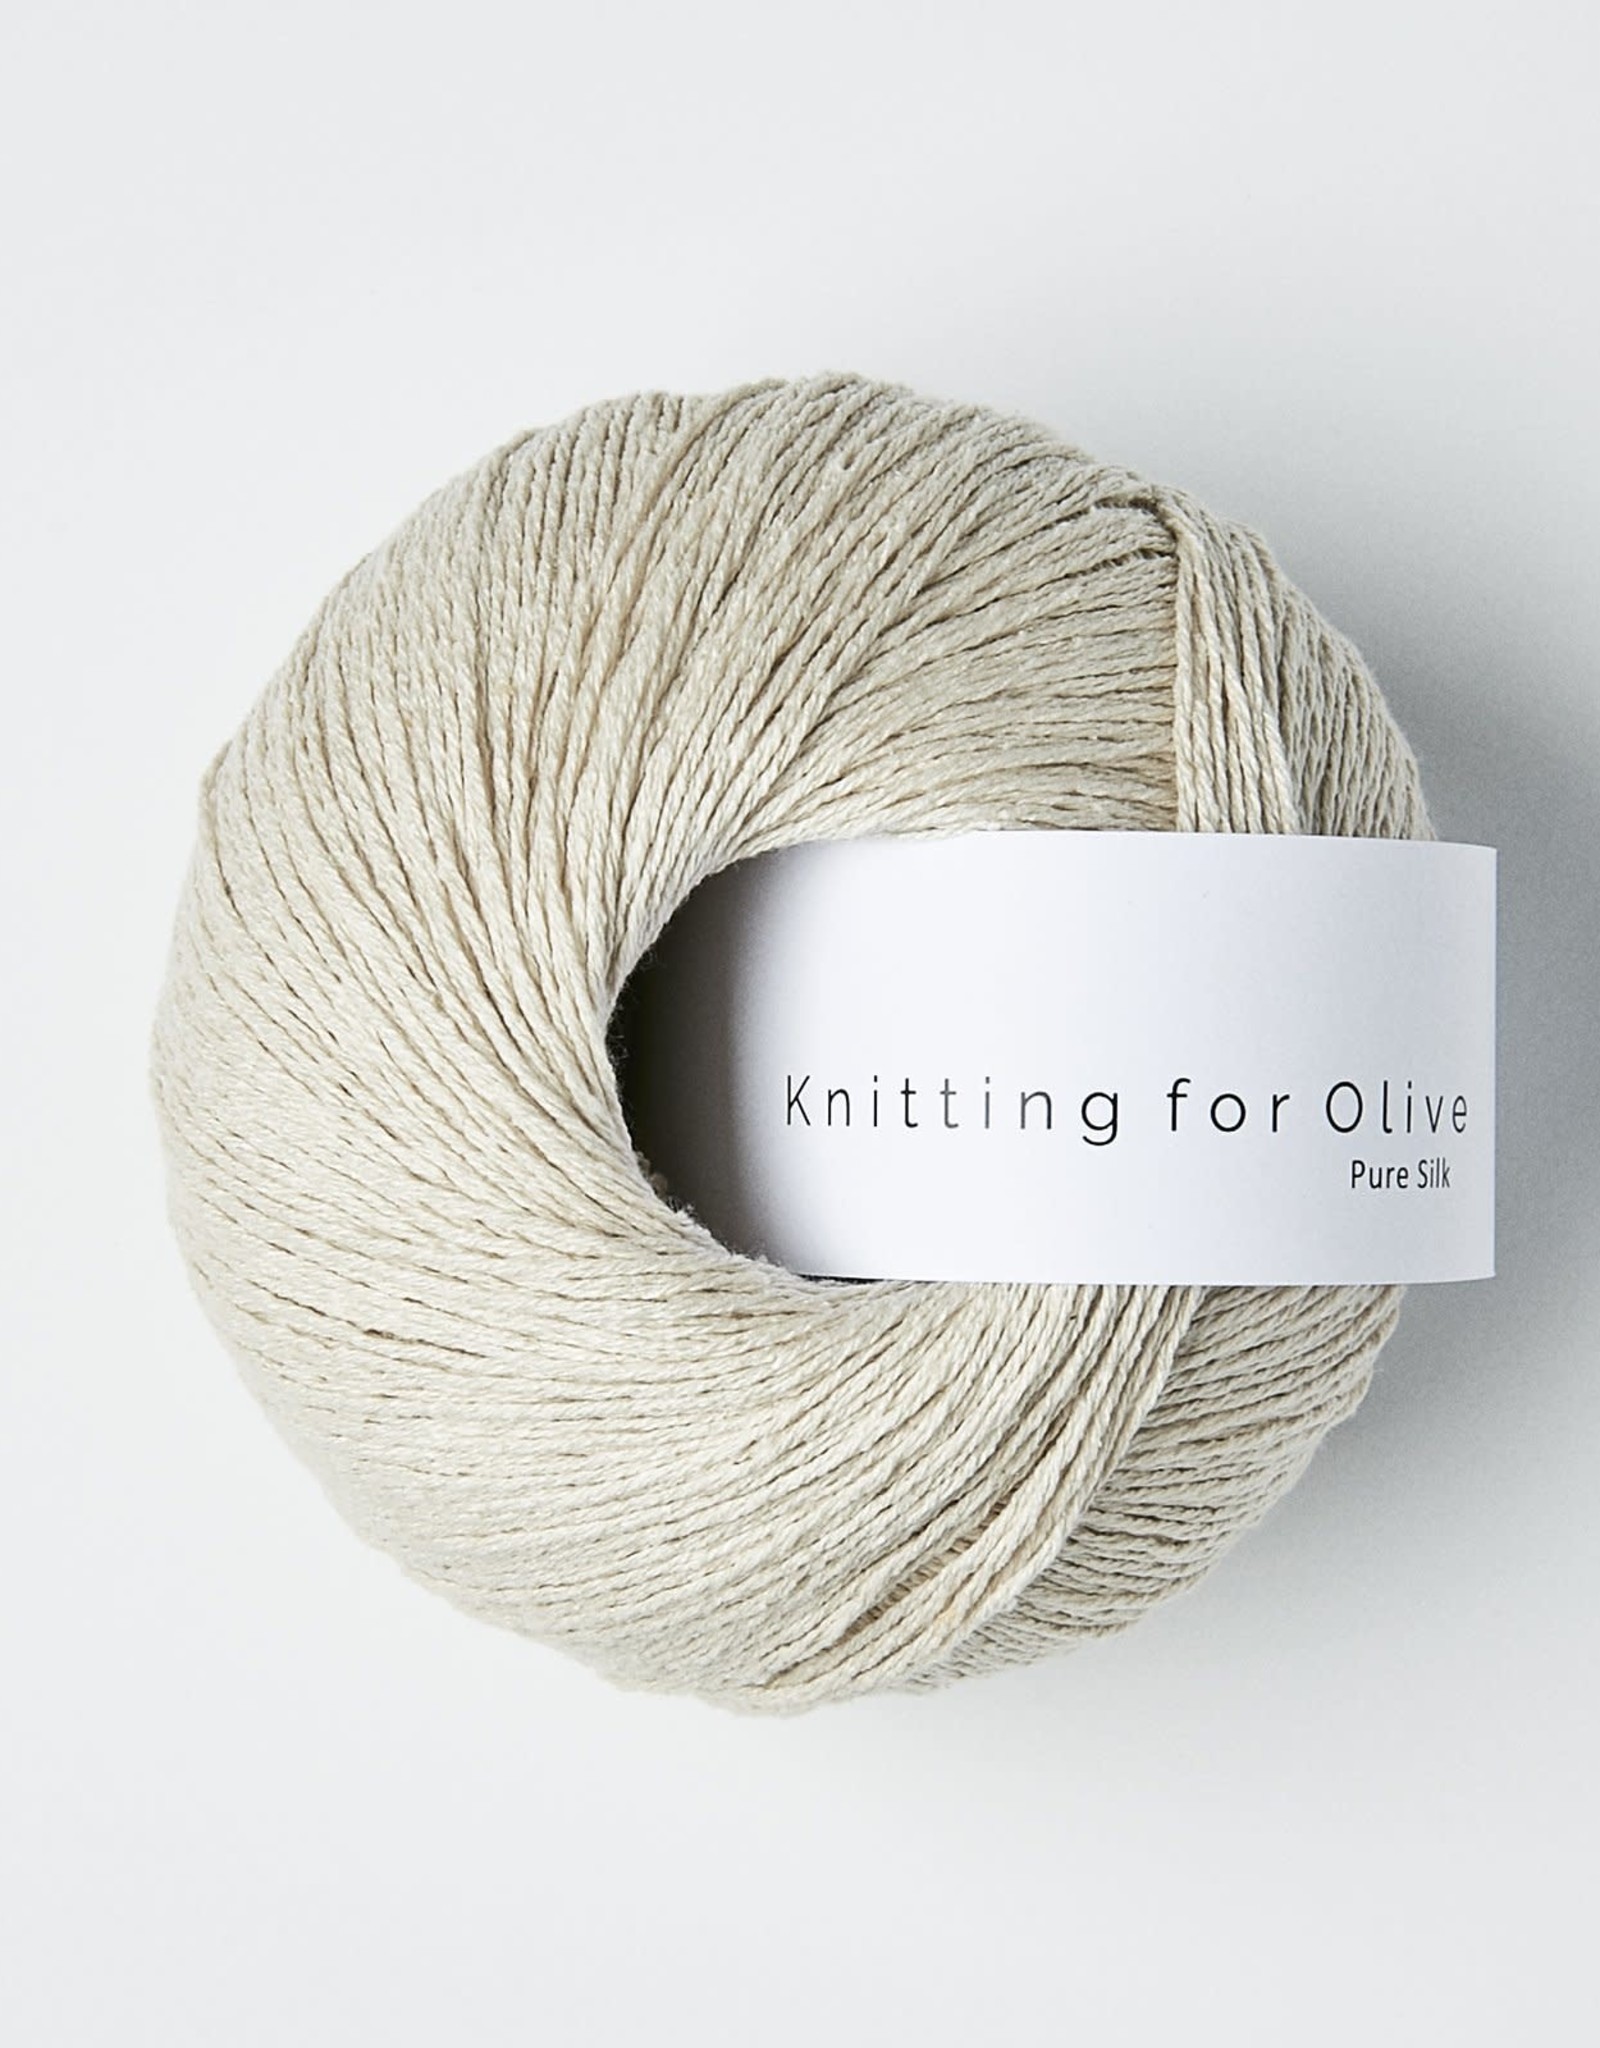 Knitting for Olive KFO Pure Silk